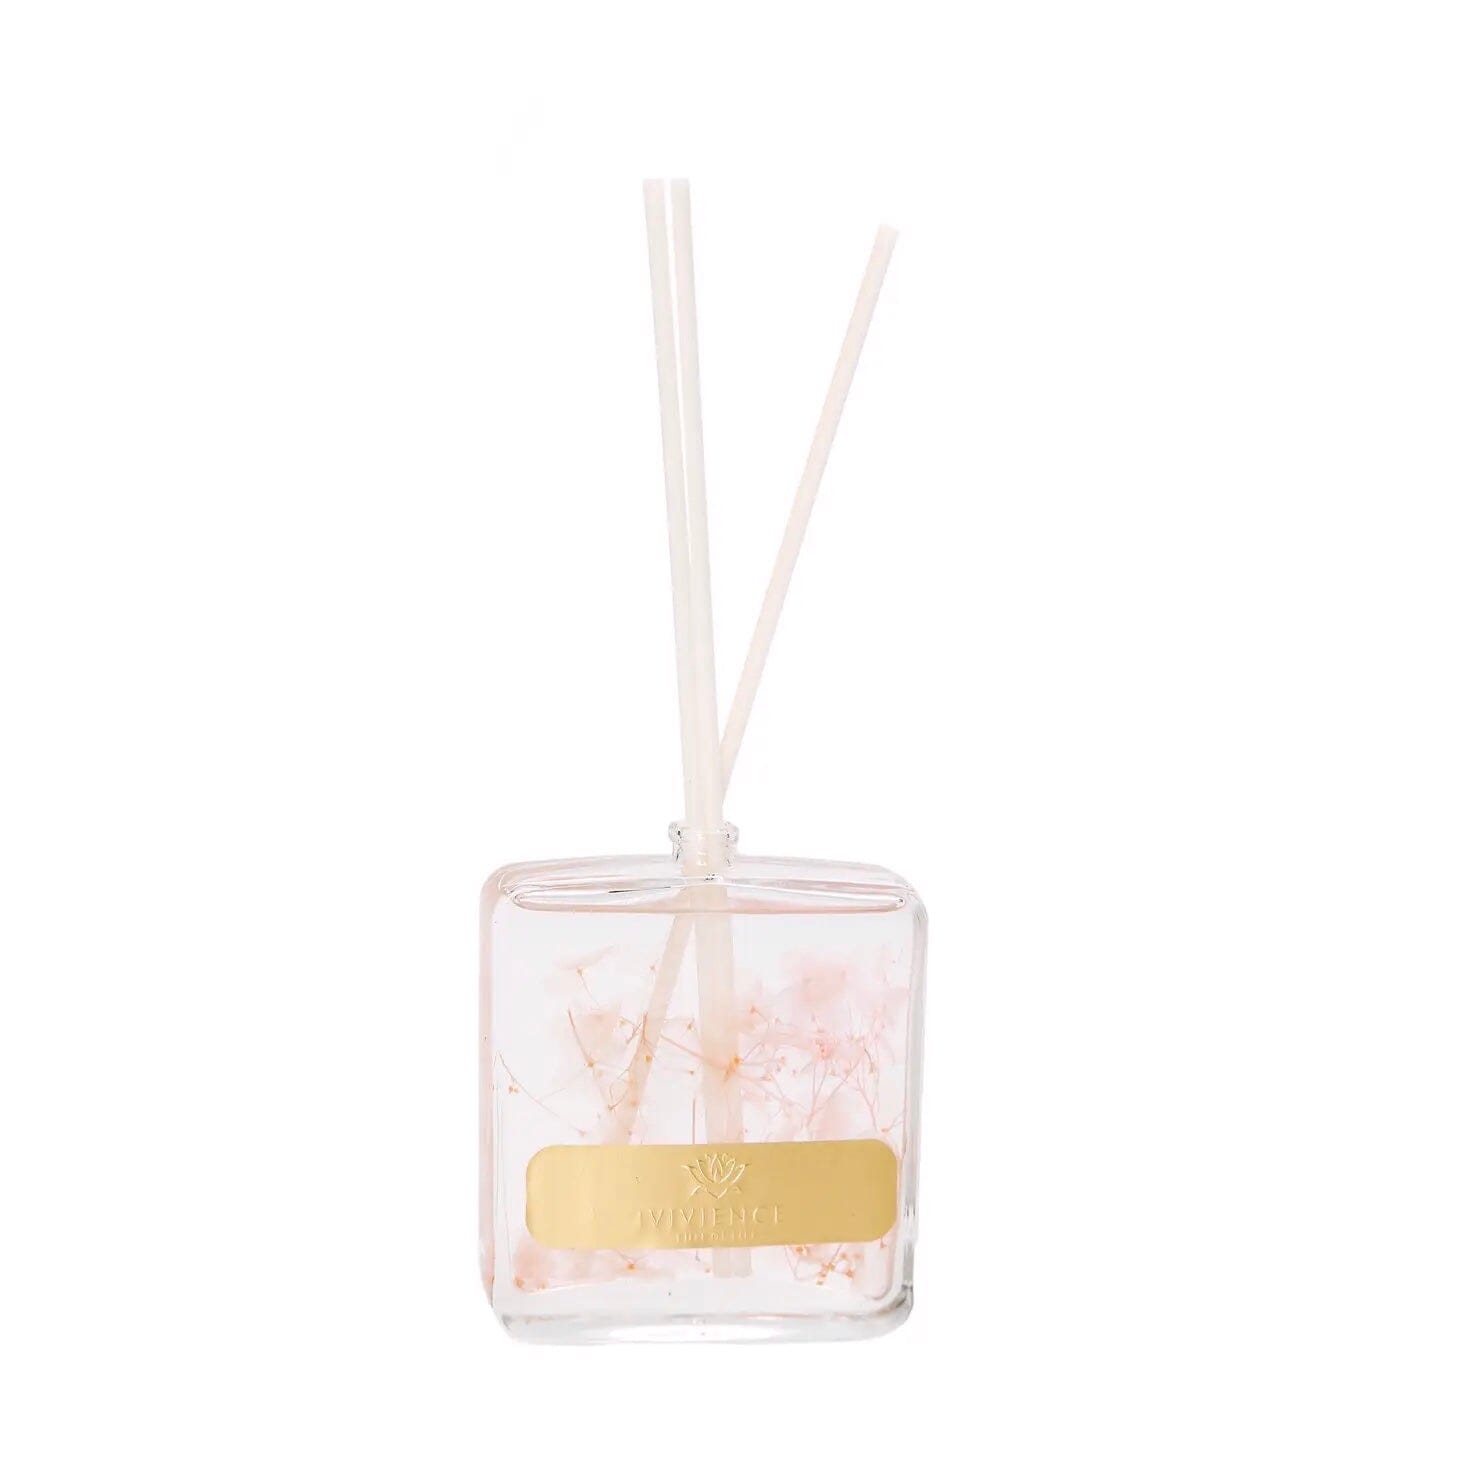 Clear Diffuser with Pink & White Flower and White Reeds Diffuser High Class Touch - Home Decor 